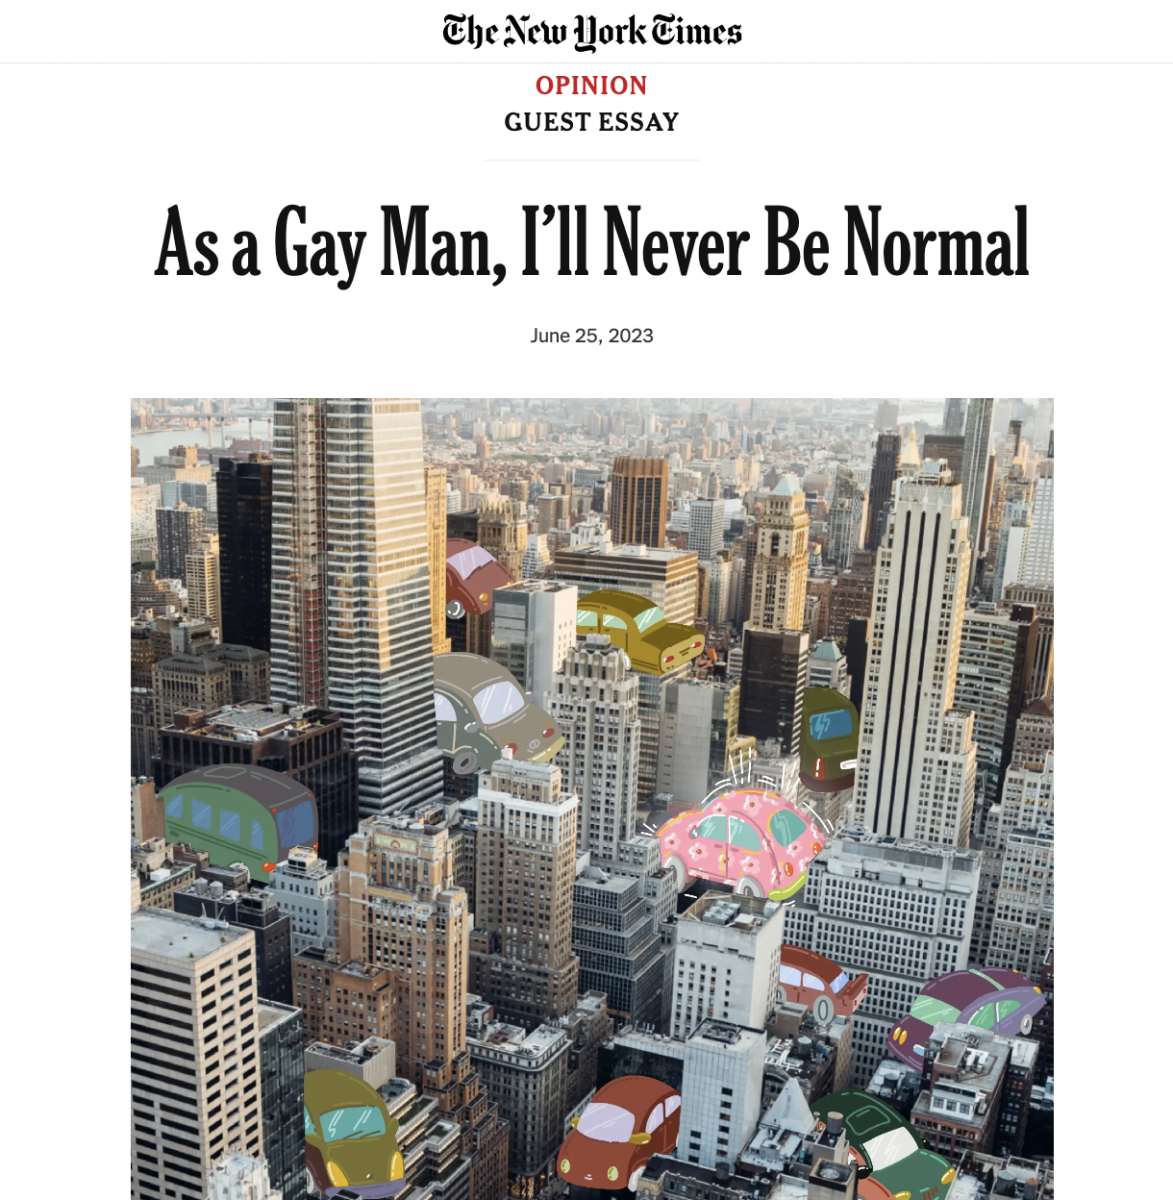 The New York Times/ Opinion section about the gay life - Alex Antonescu - Anna Goodson Illustration Agency